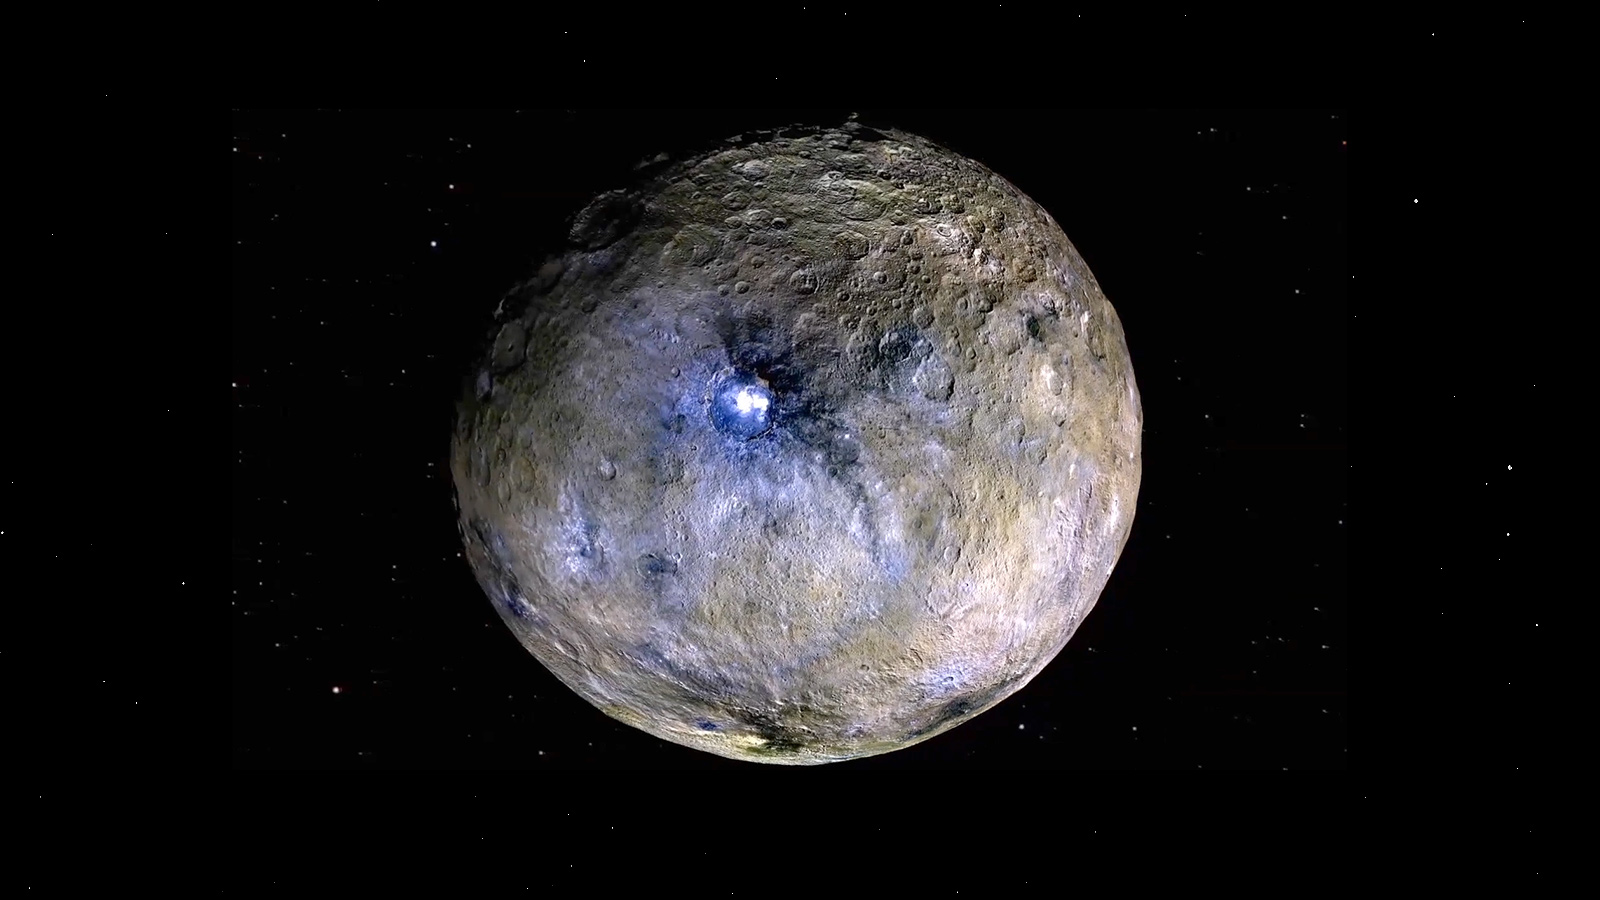 Humans could live on the dwarf planet Ceres